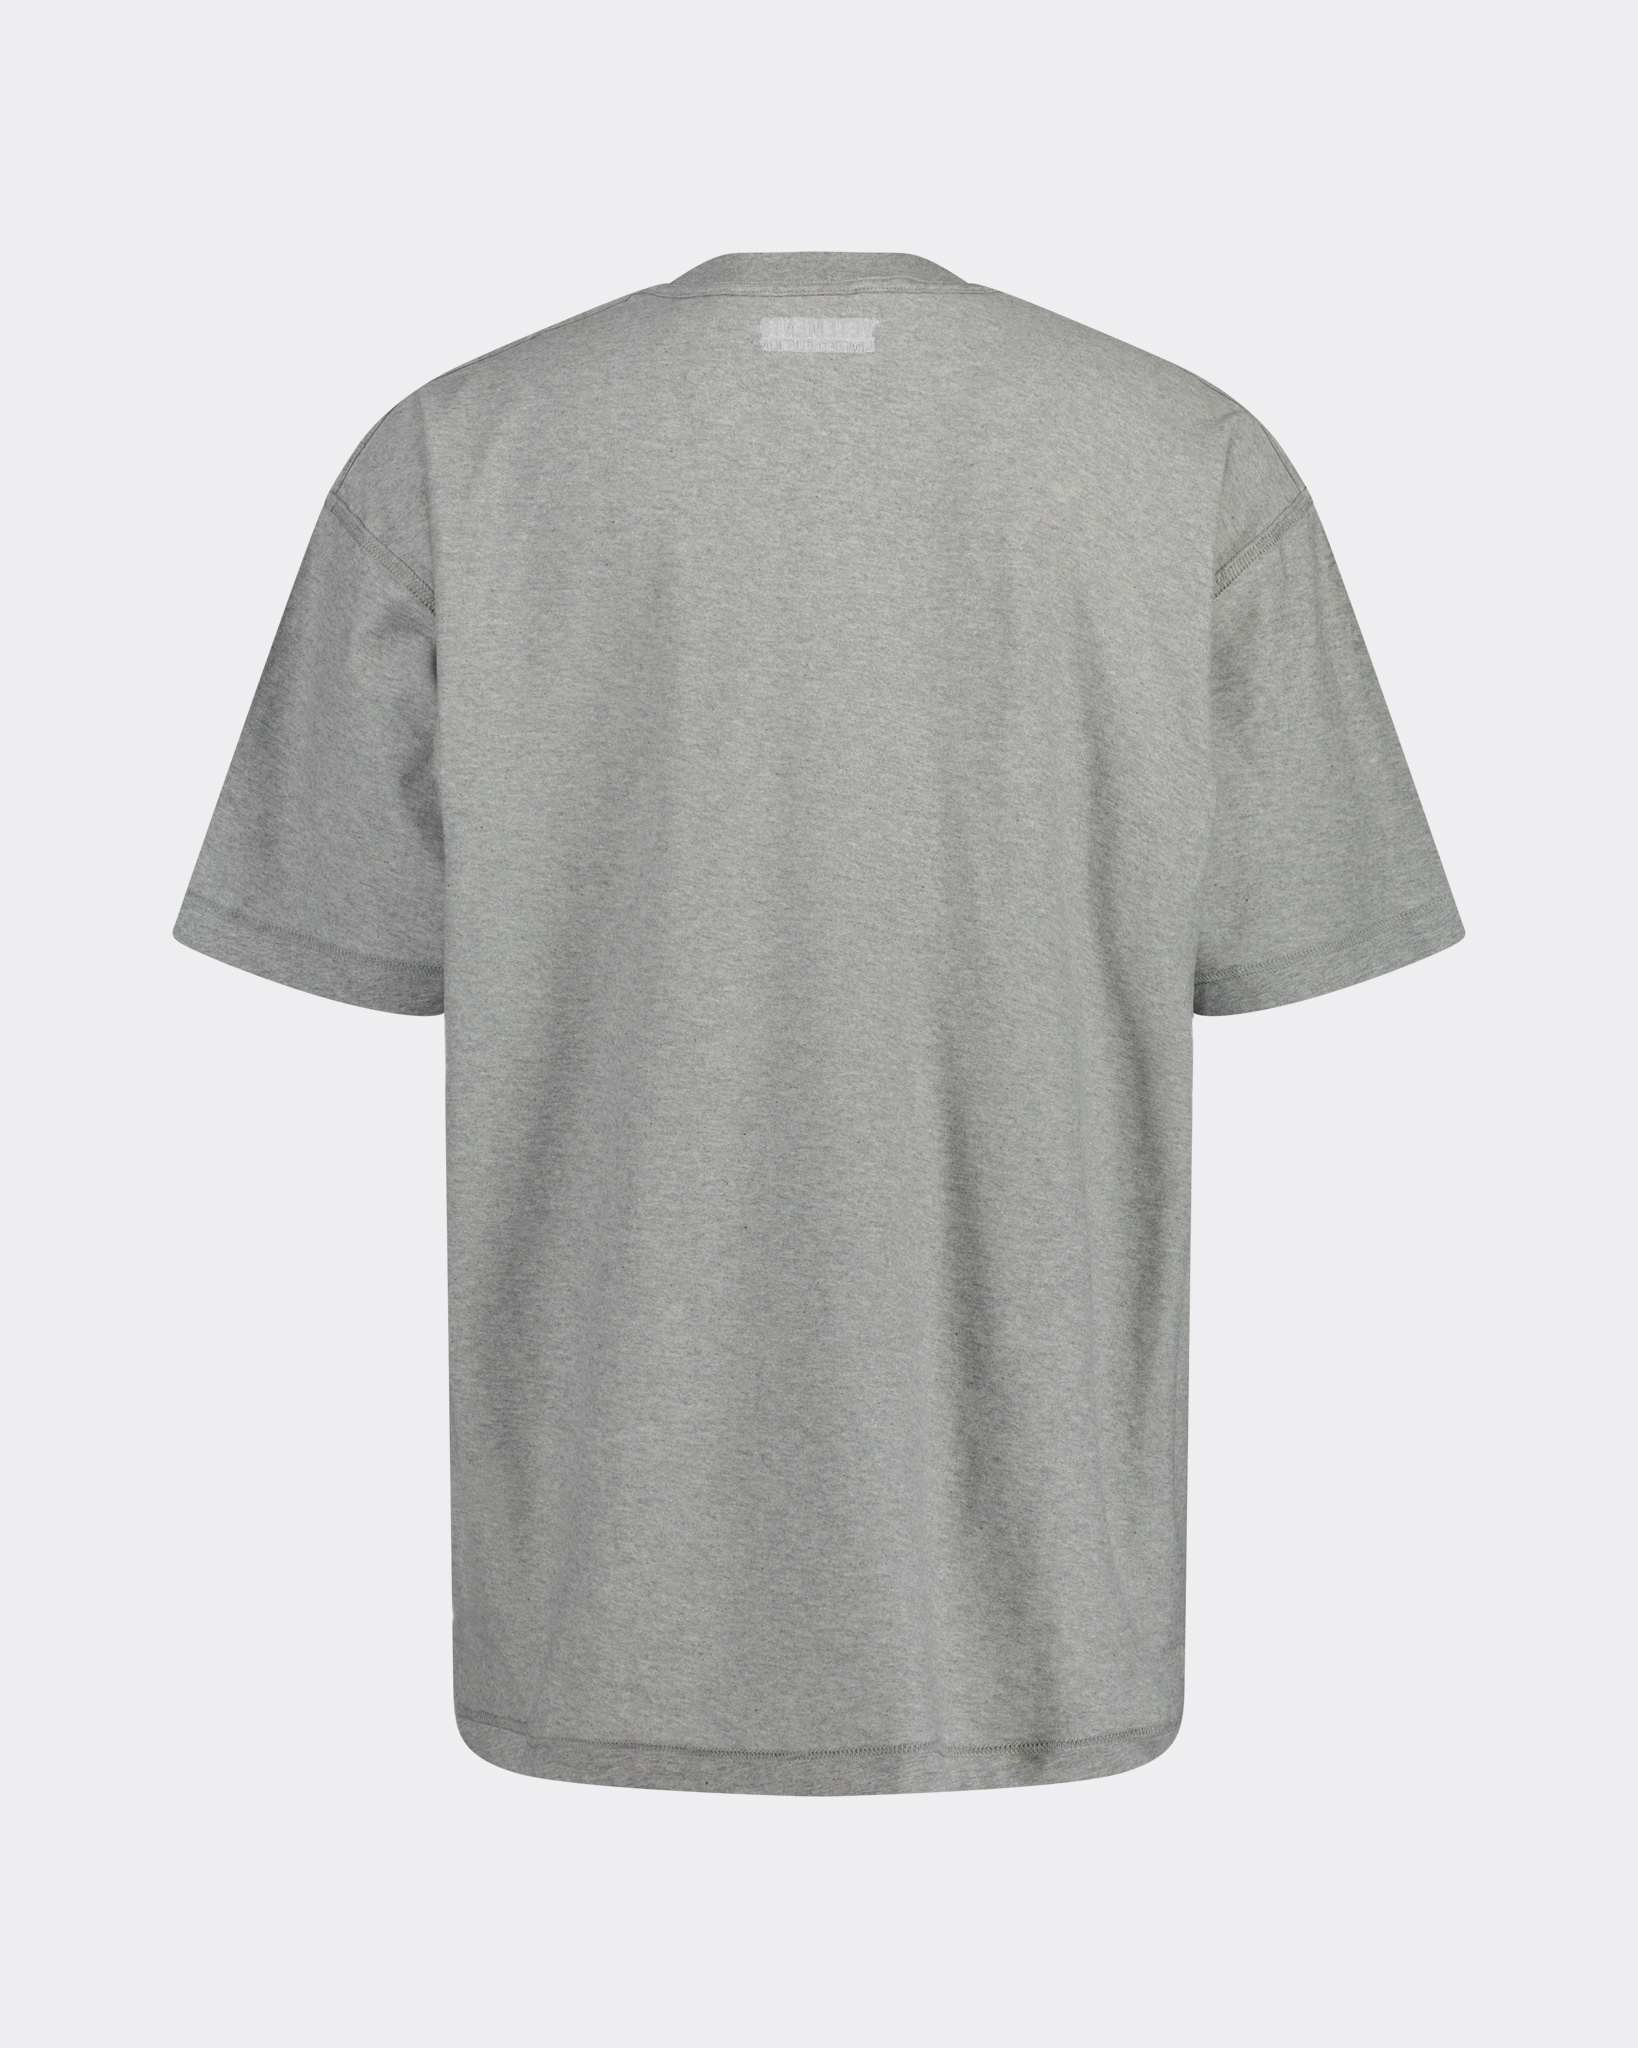 vetements inside out  tee XS grey shirts